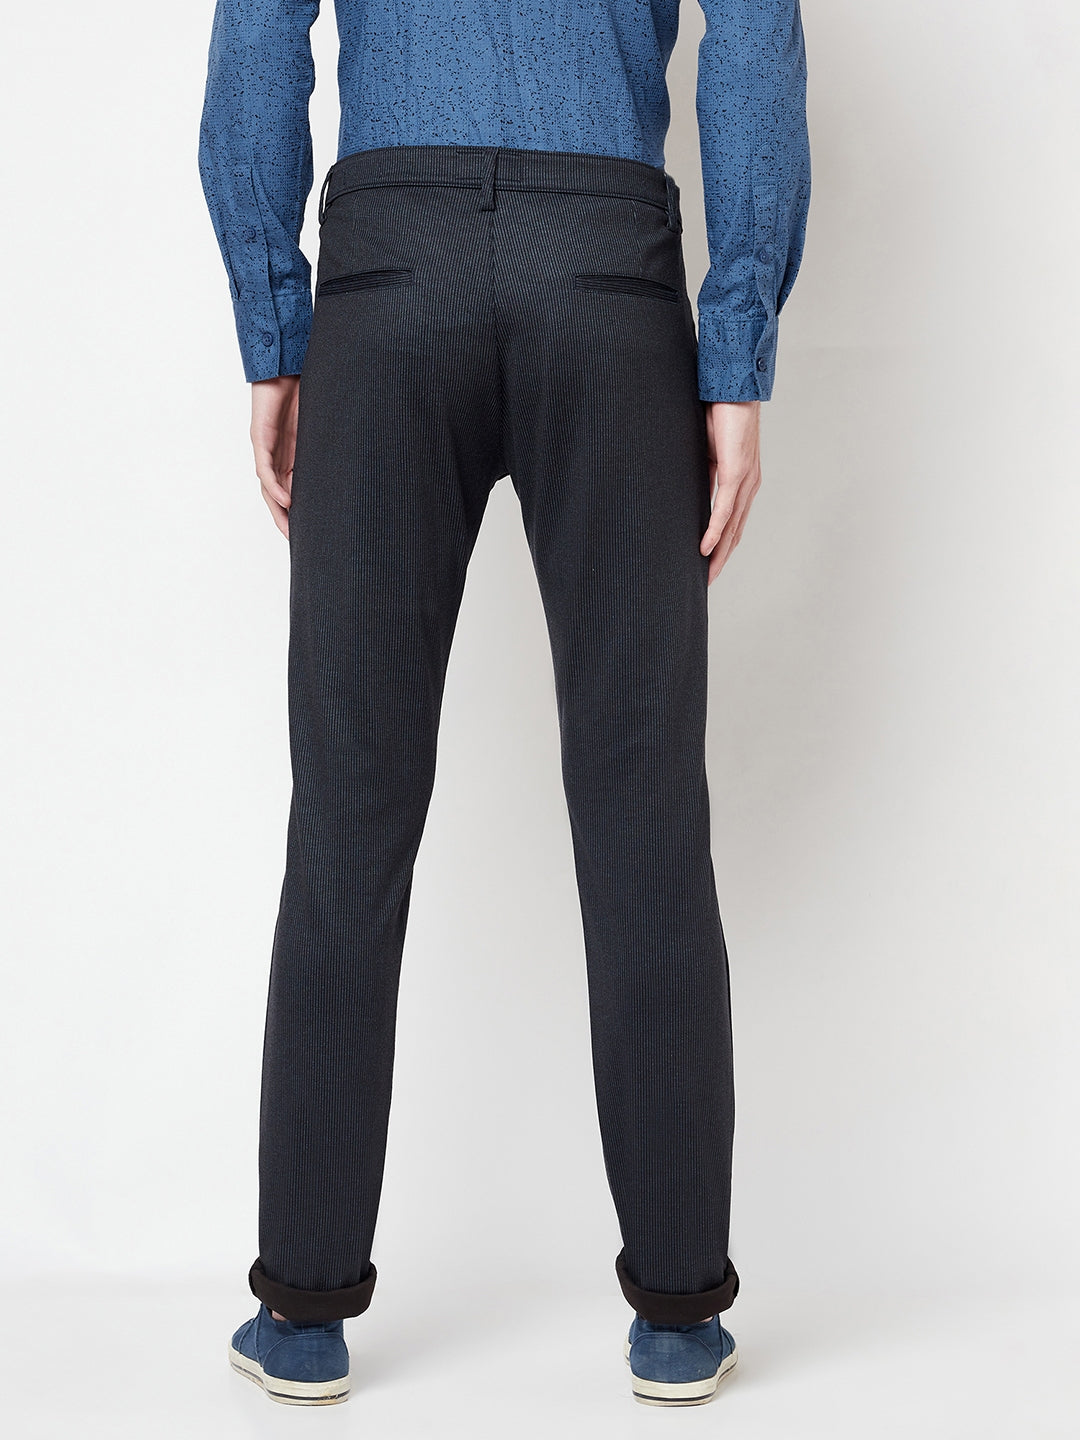 Navy Blue Striped Trousers - Men Trousers